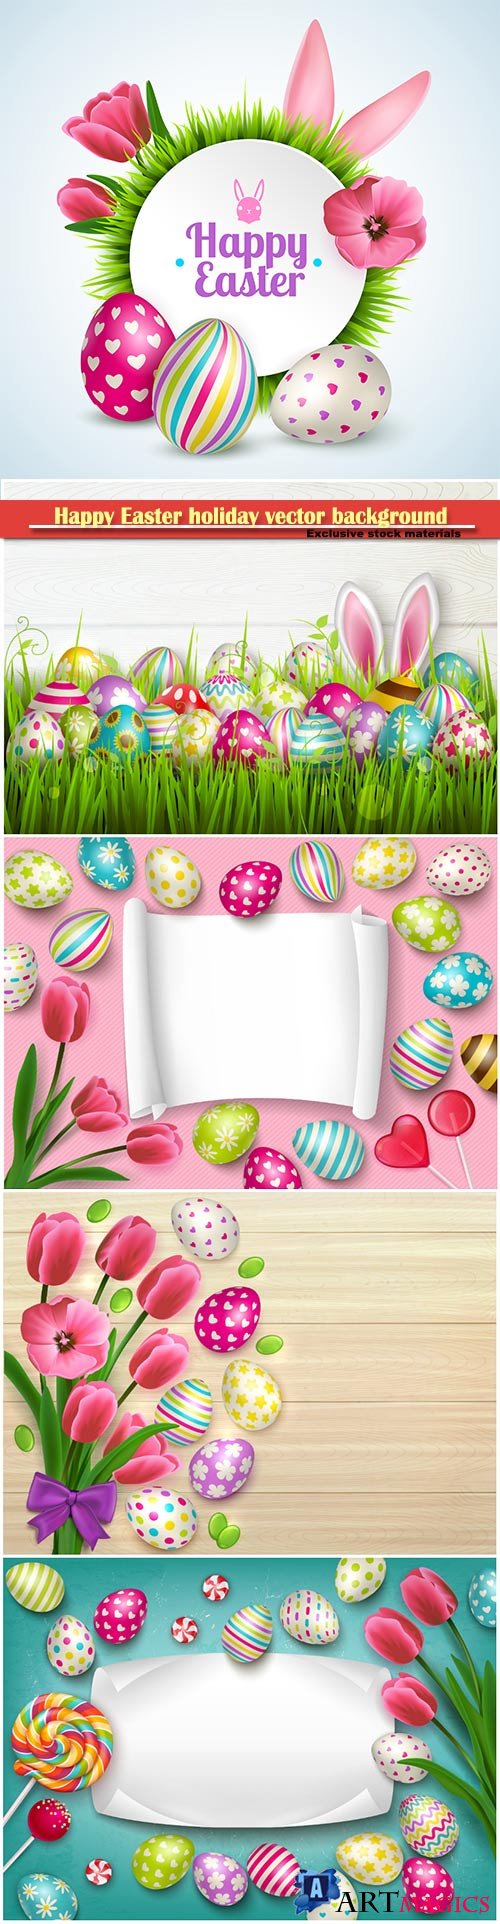 Happy easter composition with eggs rabbit ears and spring flowers vector illustration